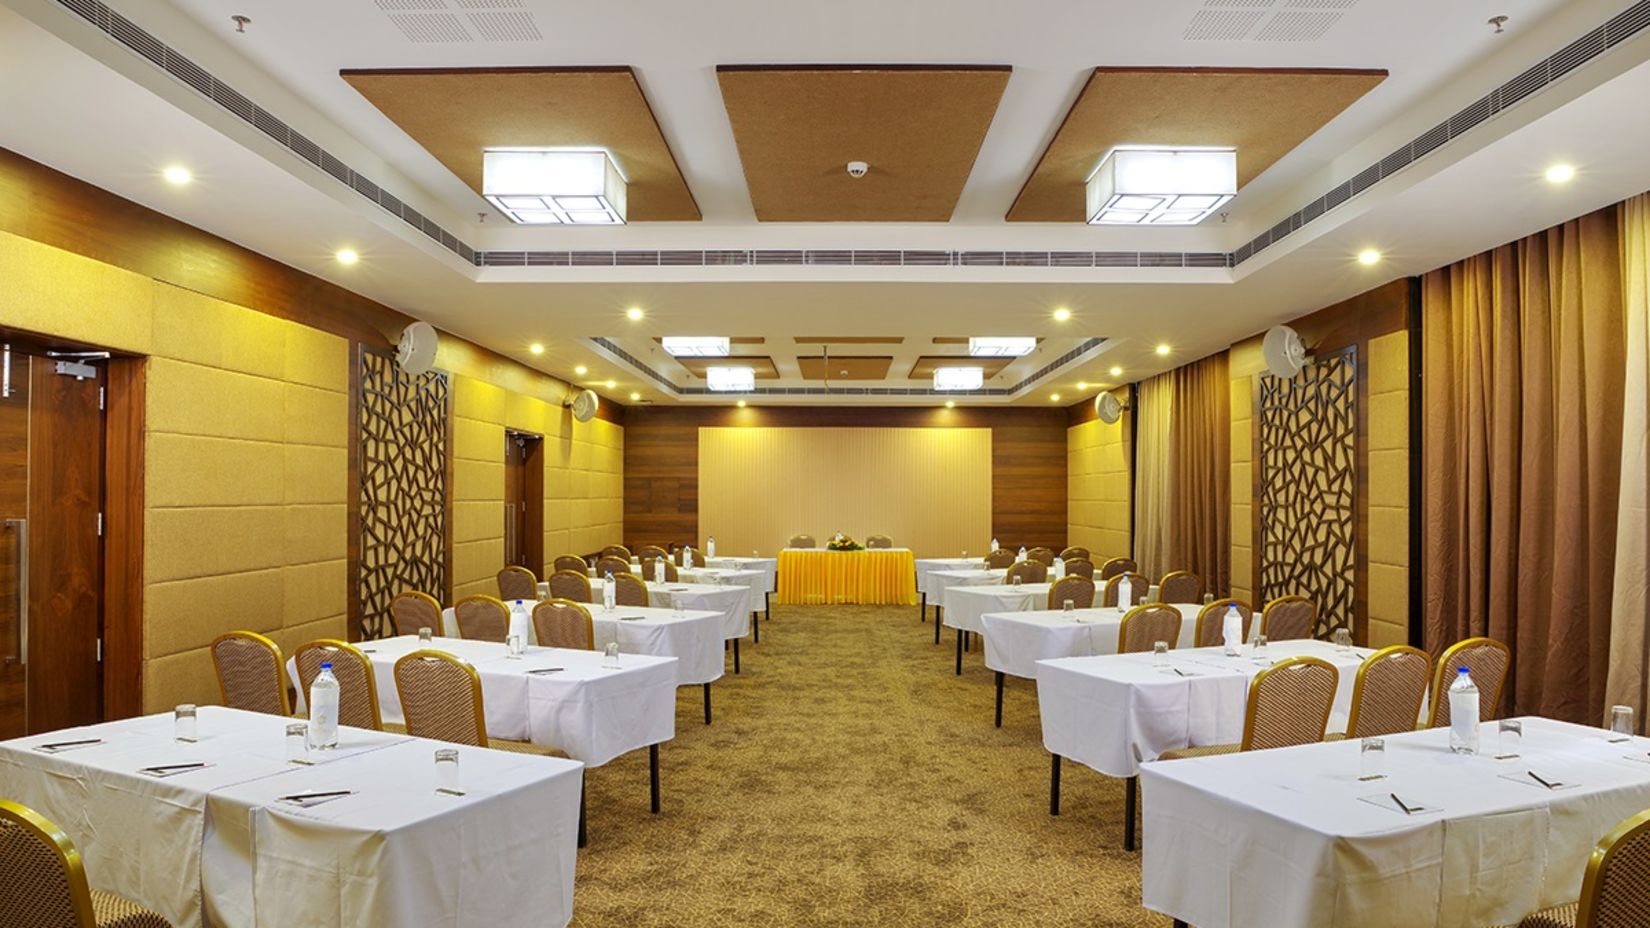 Dimora Thiruvananthapuram - image of Sapphire conference hall featuring brown and beige interiors with numerous seating options